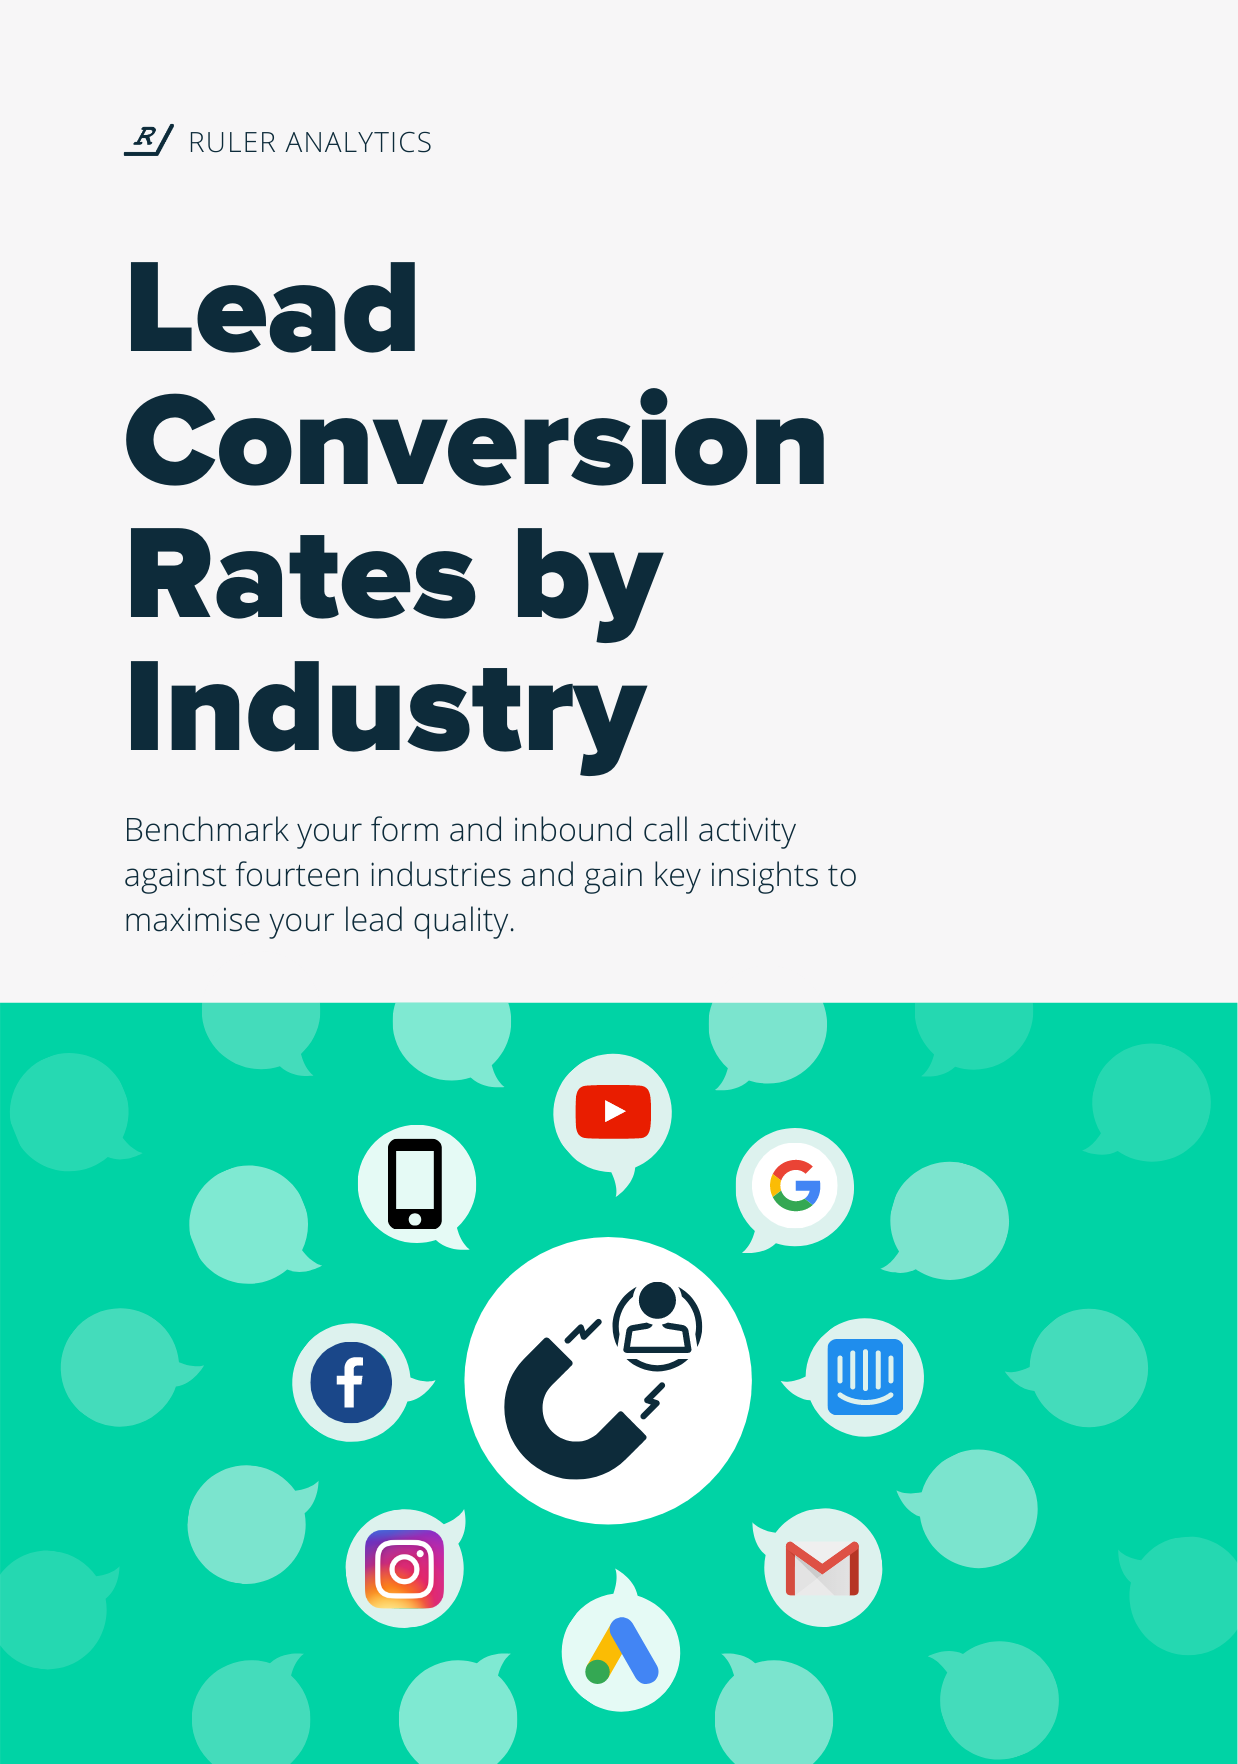 Lead Conversion Rates by Industry